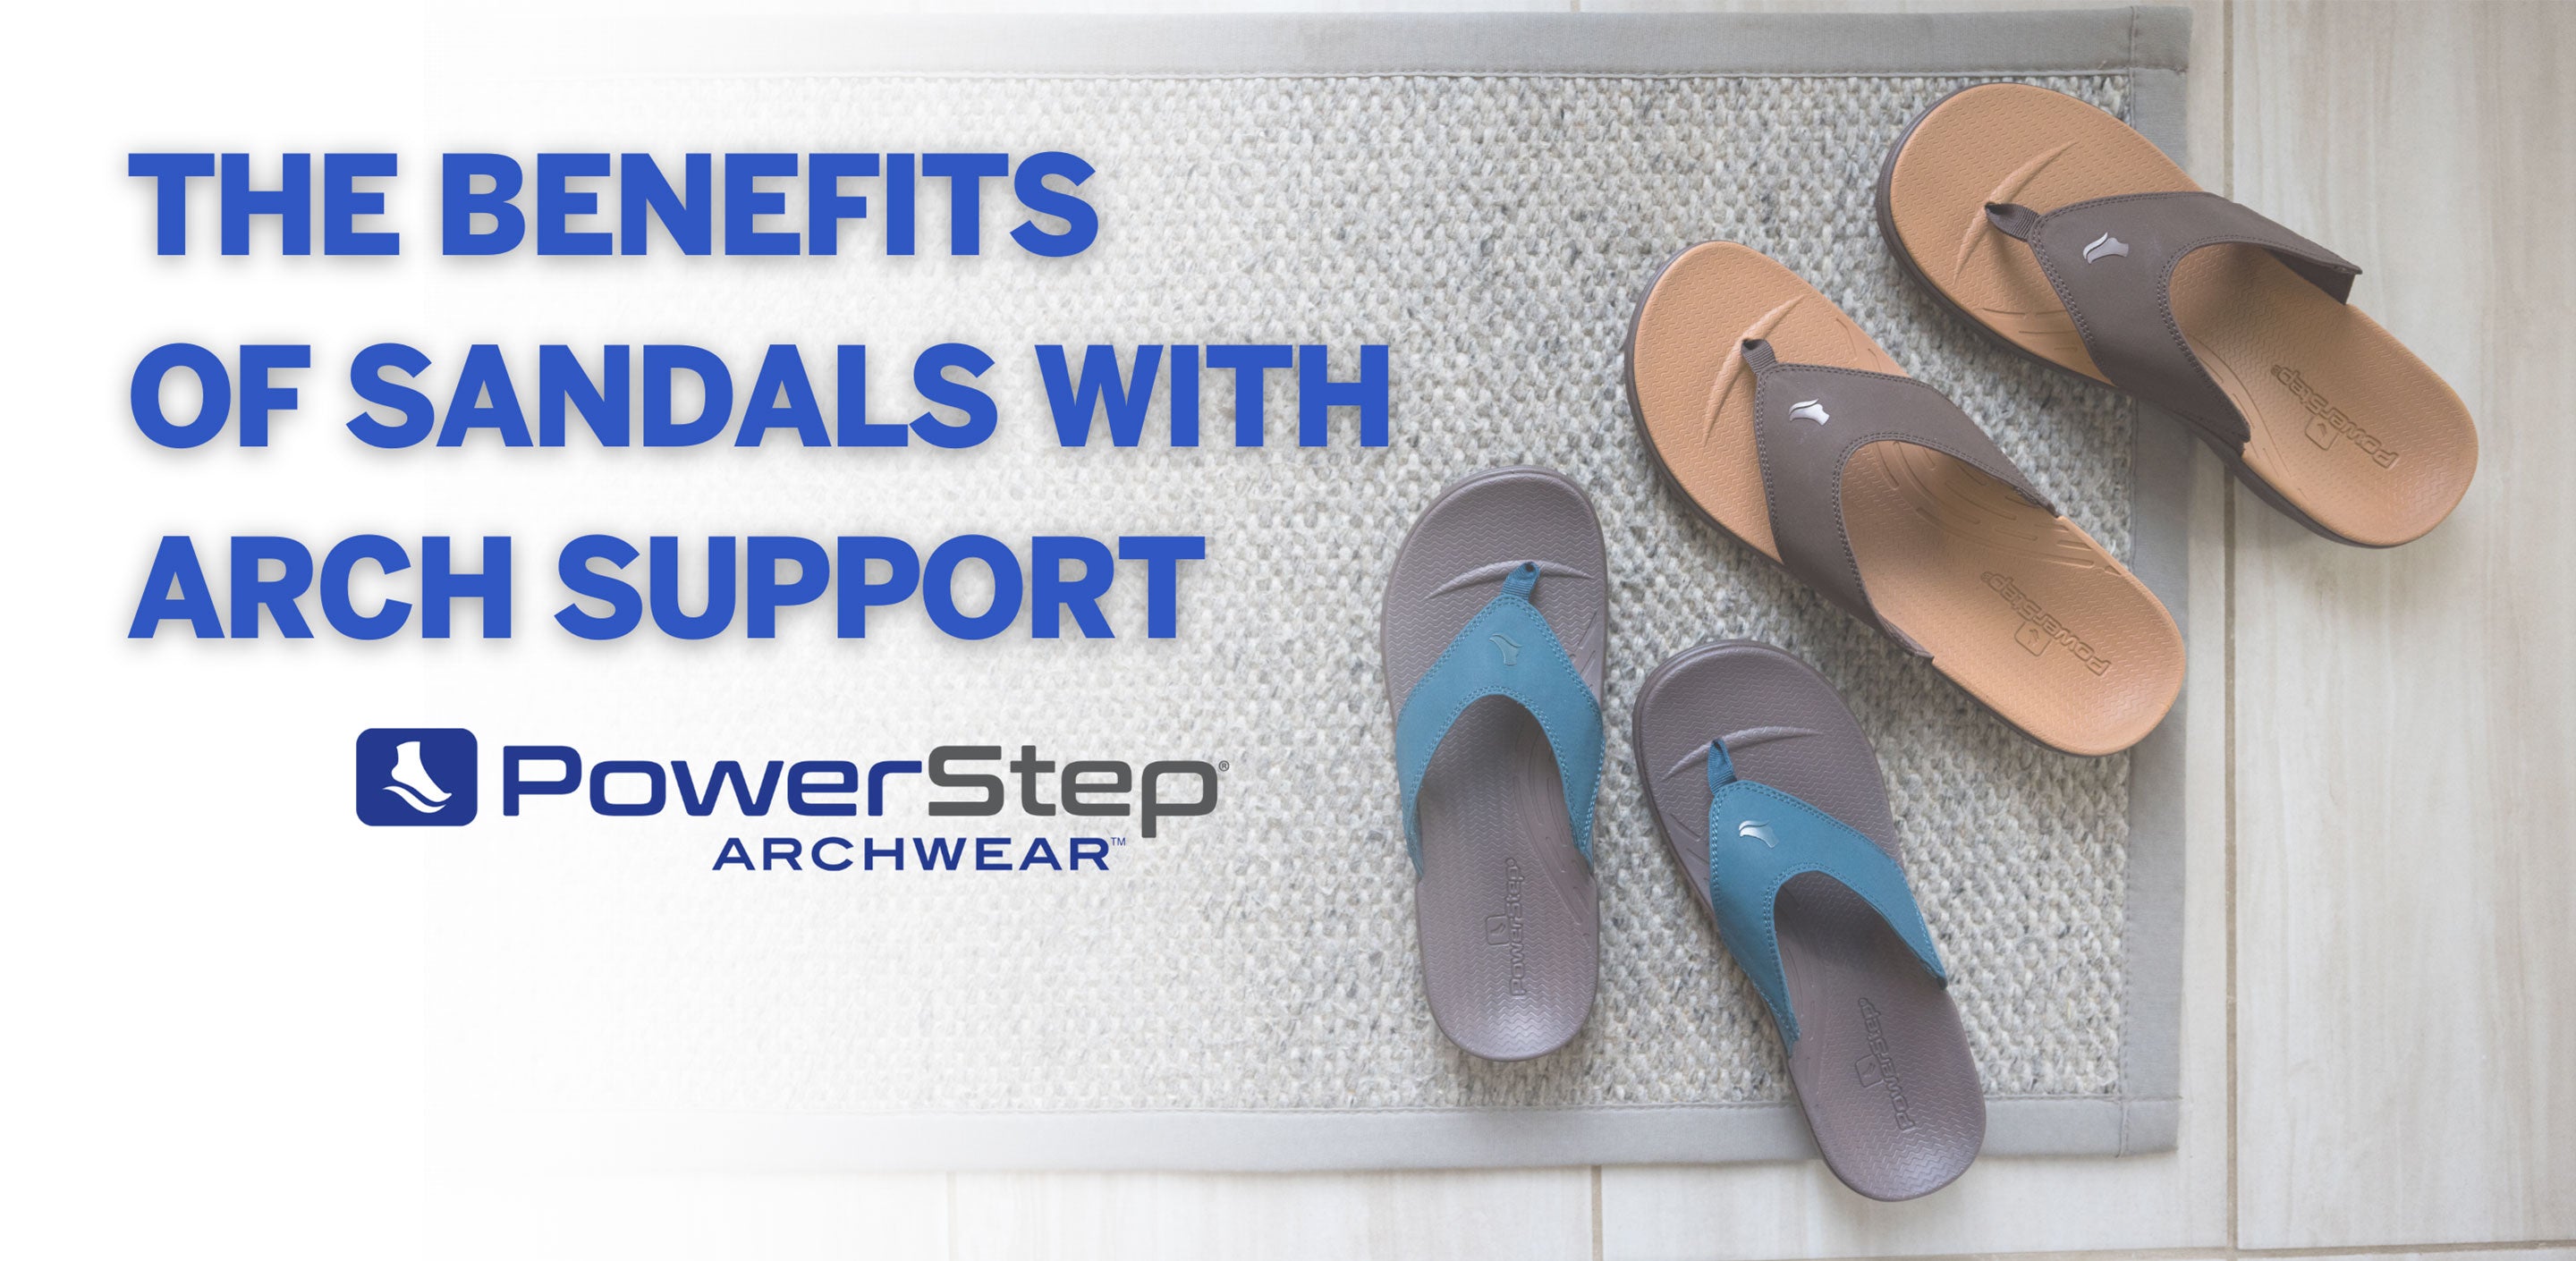 Keep Your Body Happy This Summer with Orthotic Sandals from 360